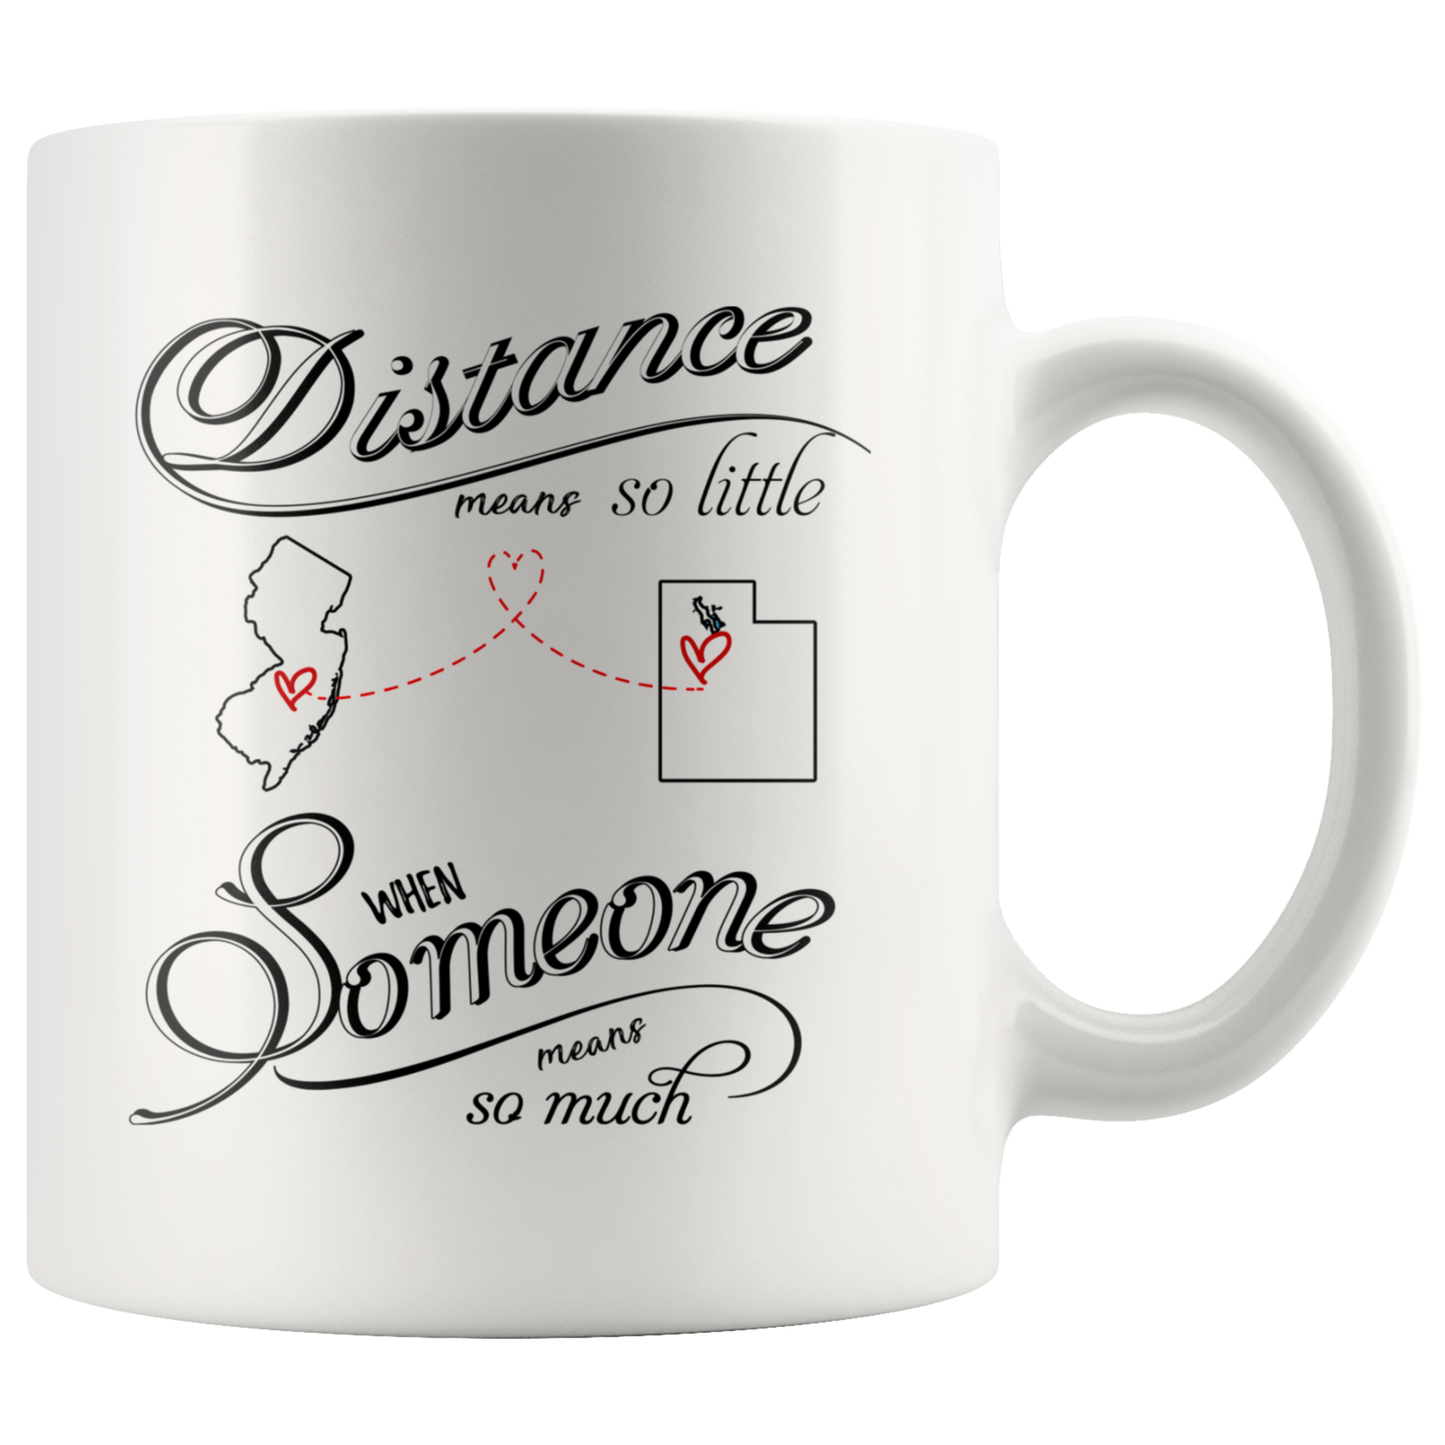 M-20485933-sp-23154 - Mothers Day Coffee Mug New Jersey Utah Distance Means So Lit